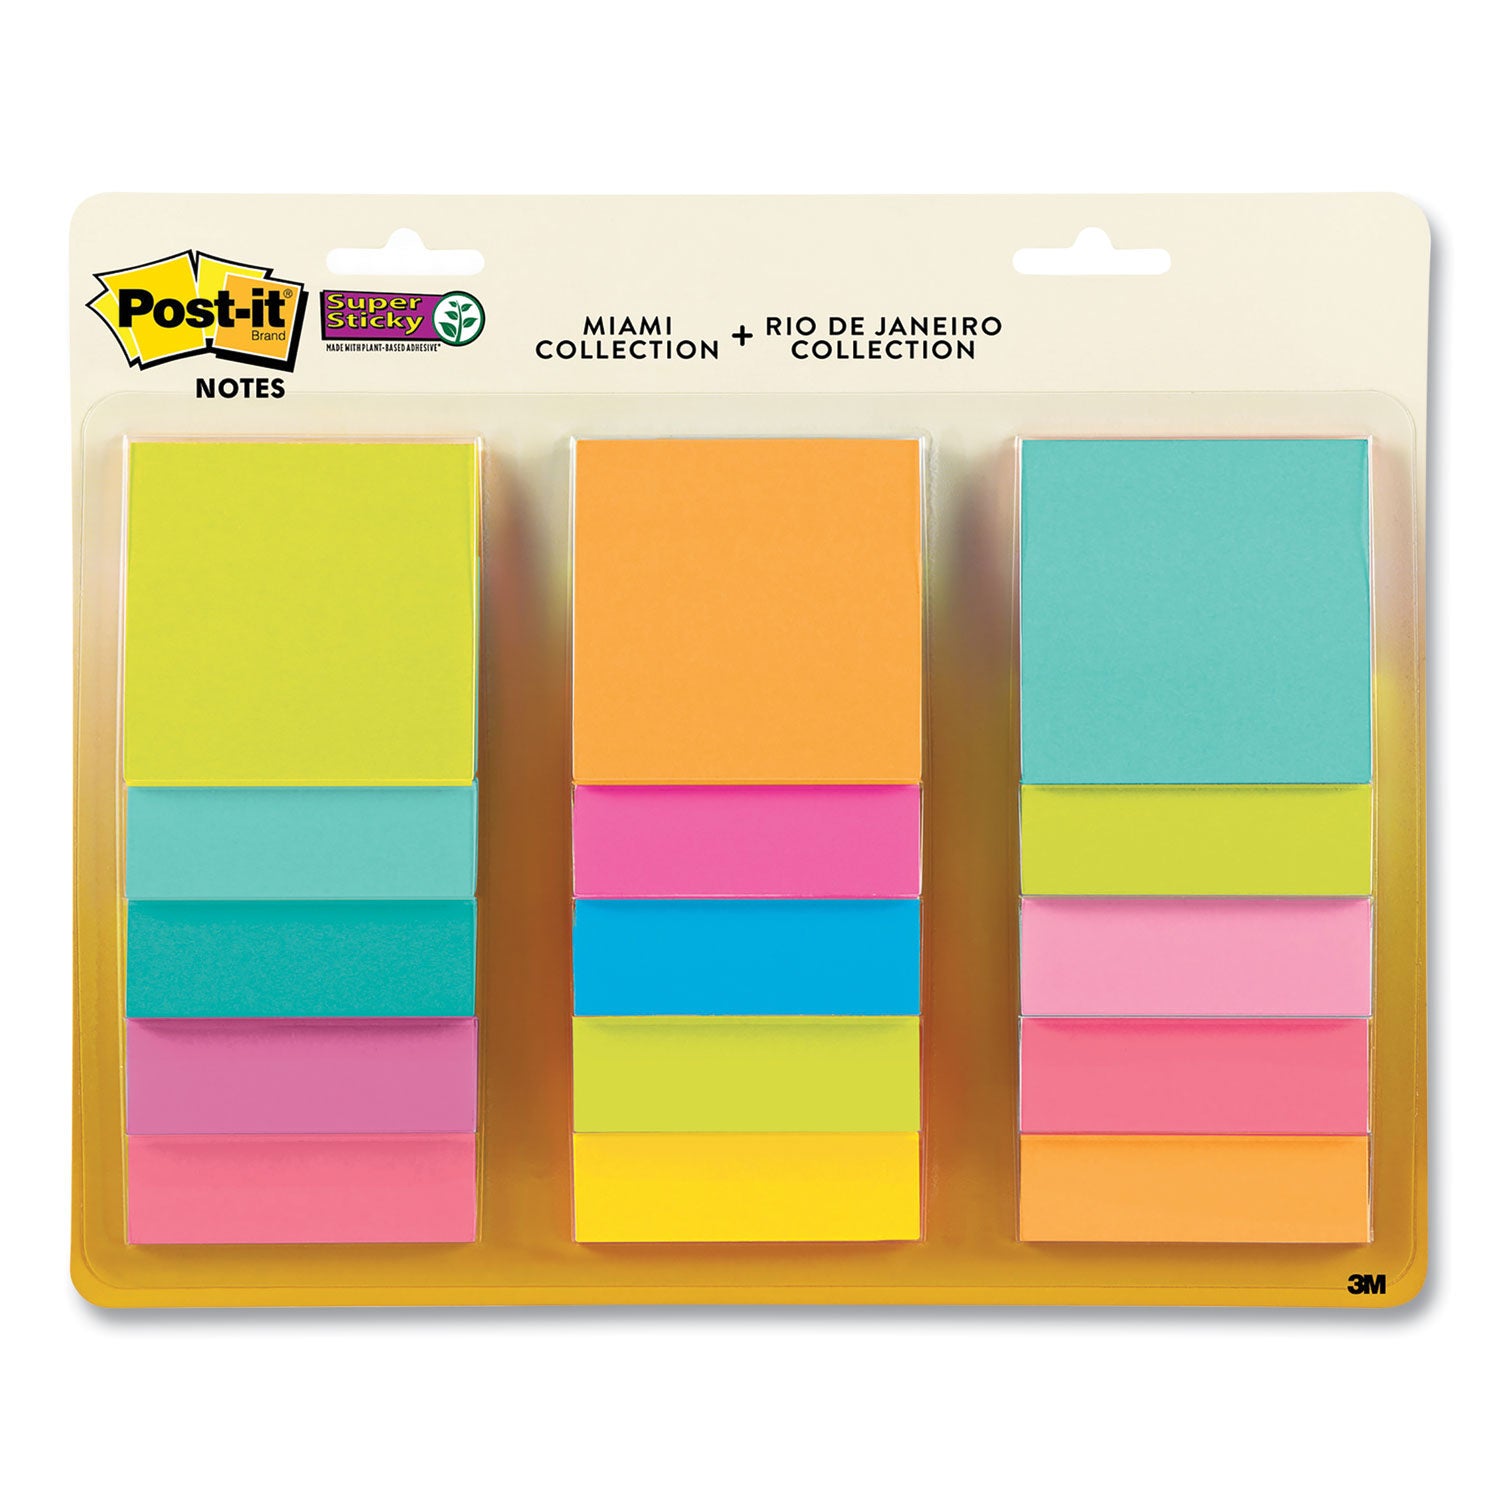 pad-collection-assortment-pack-3-x-3-energy-boost-and-supernova-neon-color-collections-45-sheets-pad-15-pads-pack_mmm65415ssmlti2 - 1